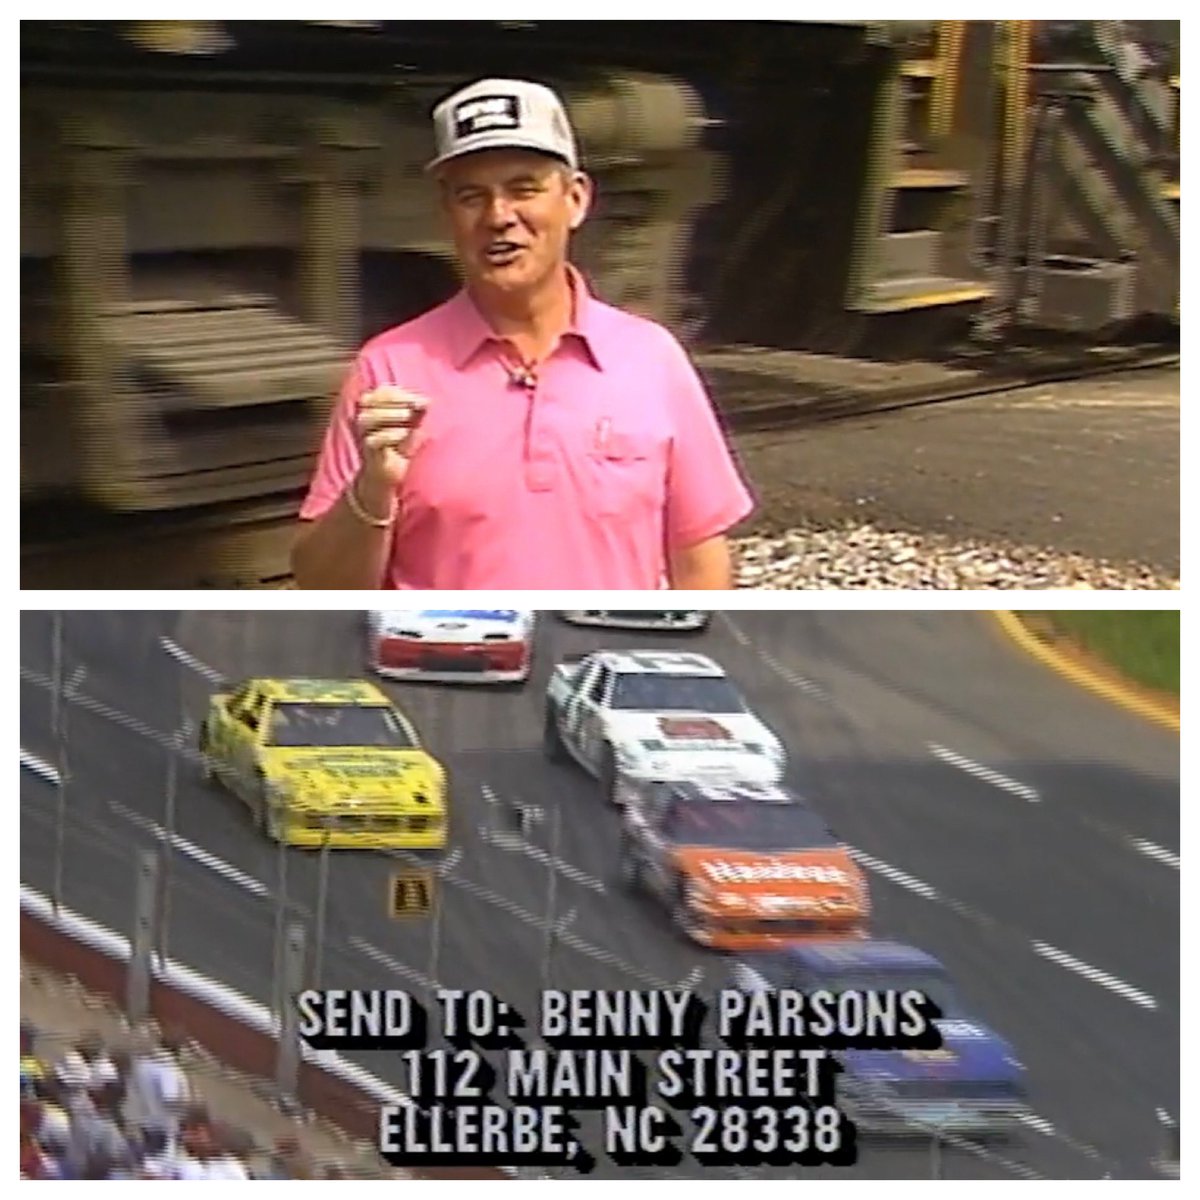 You could mail a hat to Benny Parsons in 1989 that he would wear, as well as mention your name during his “Hat of the Week” segment on ESPN.